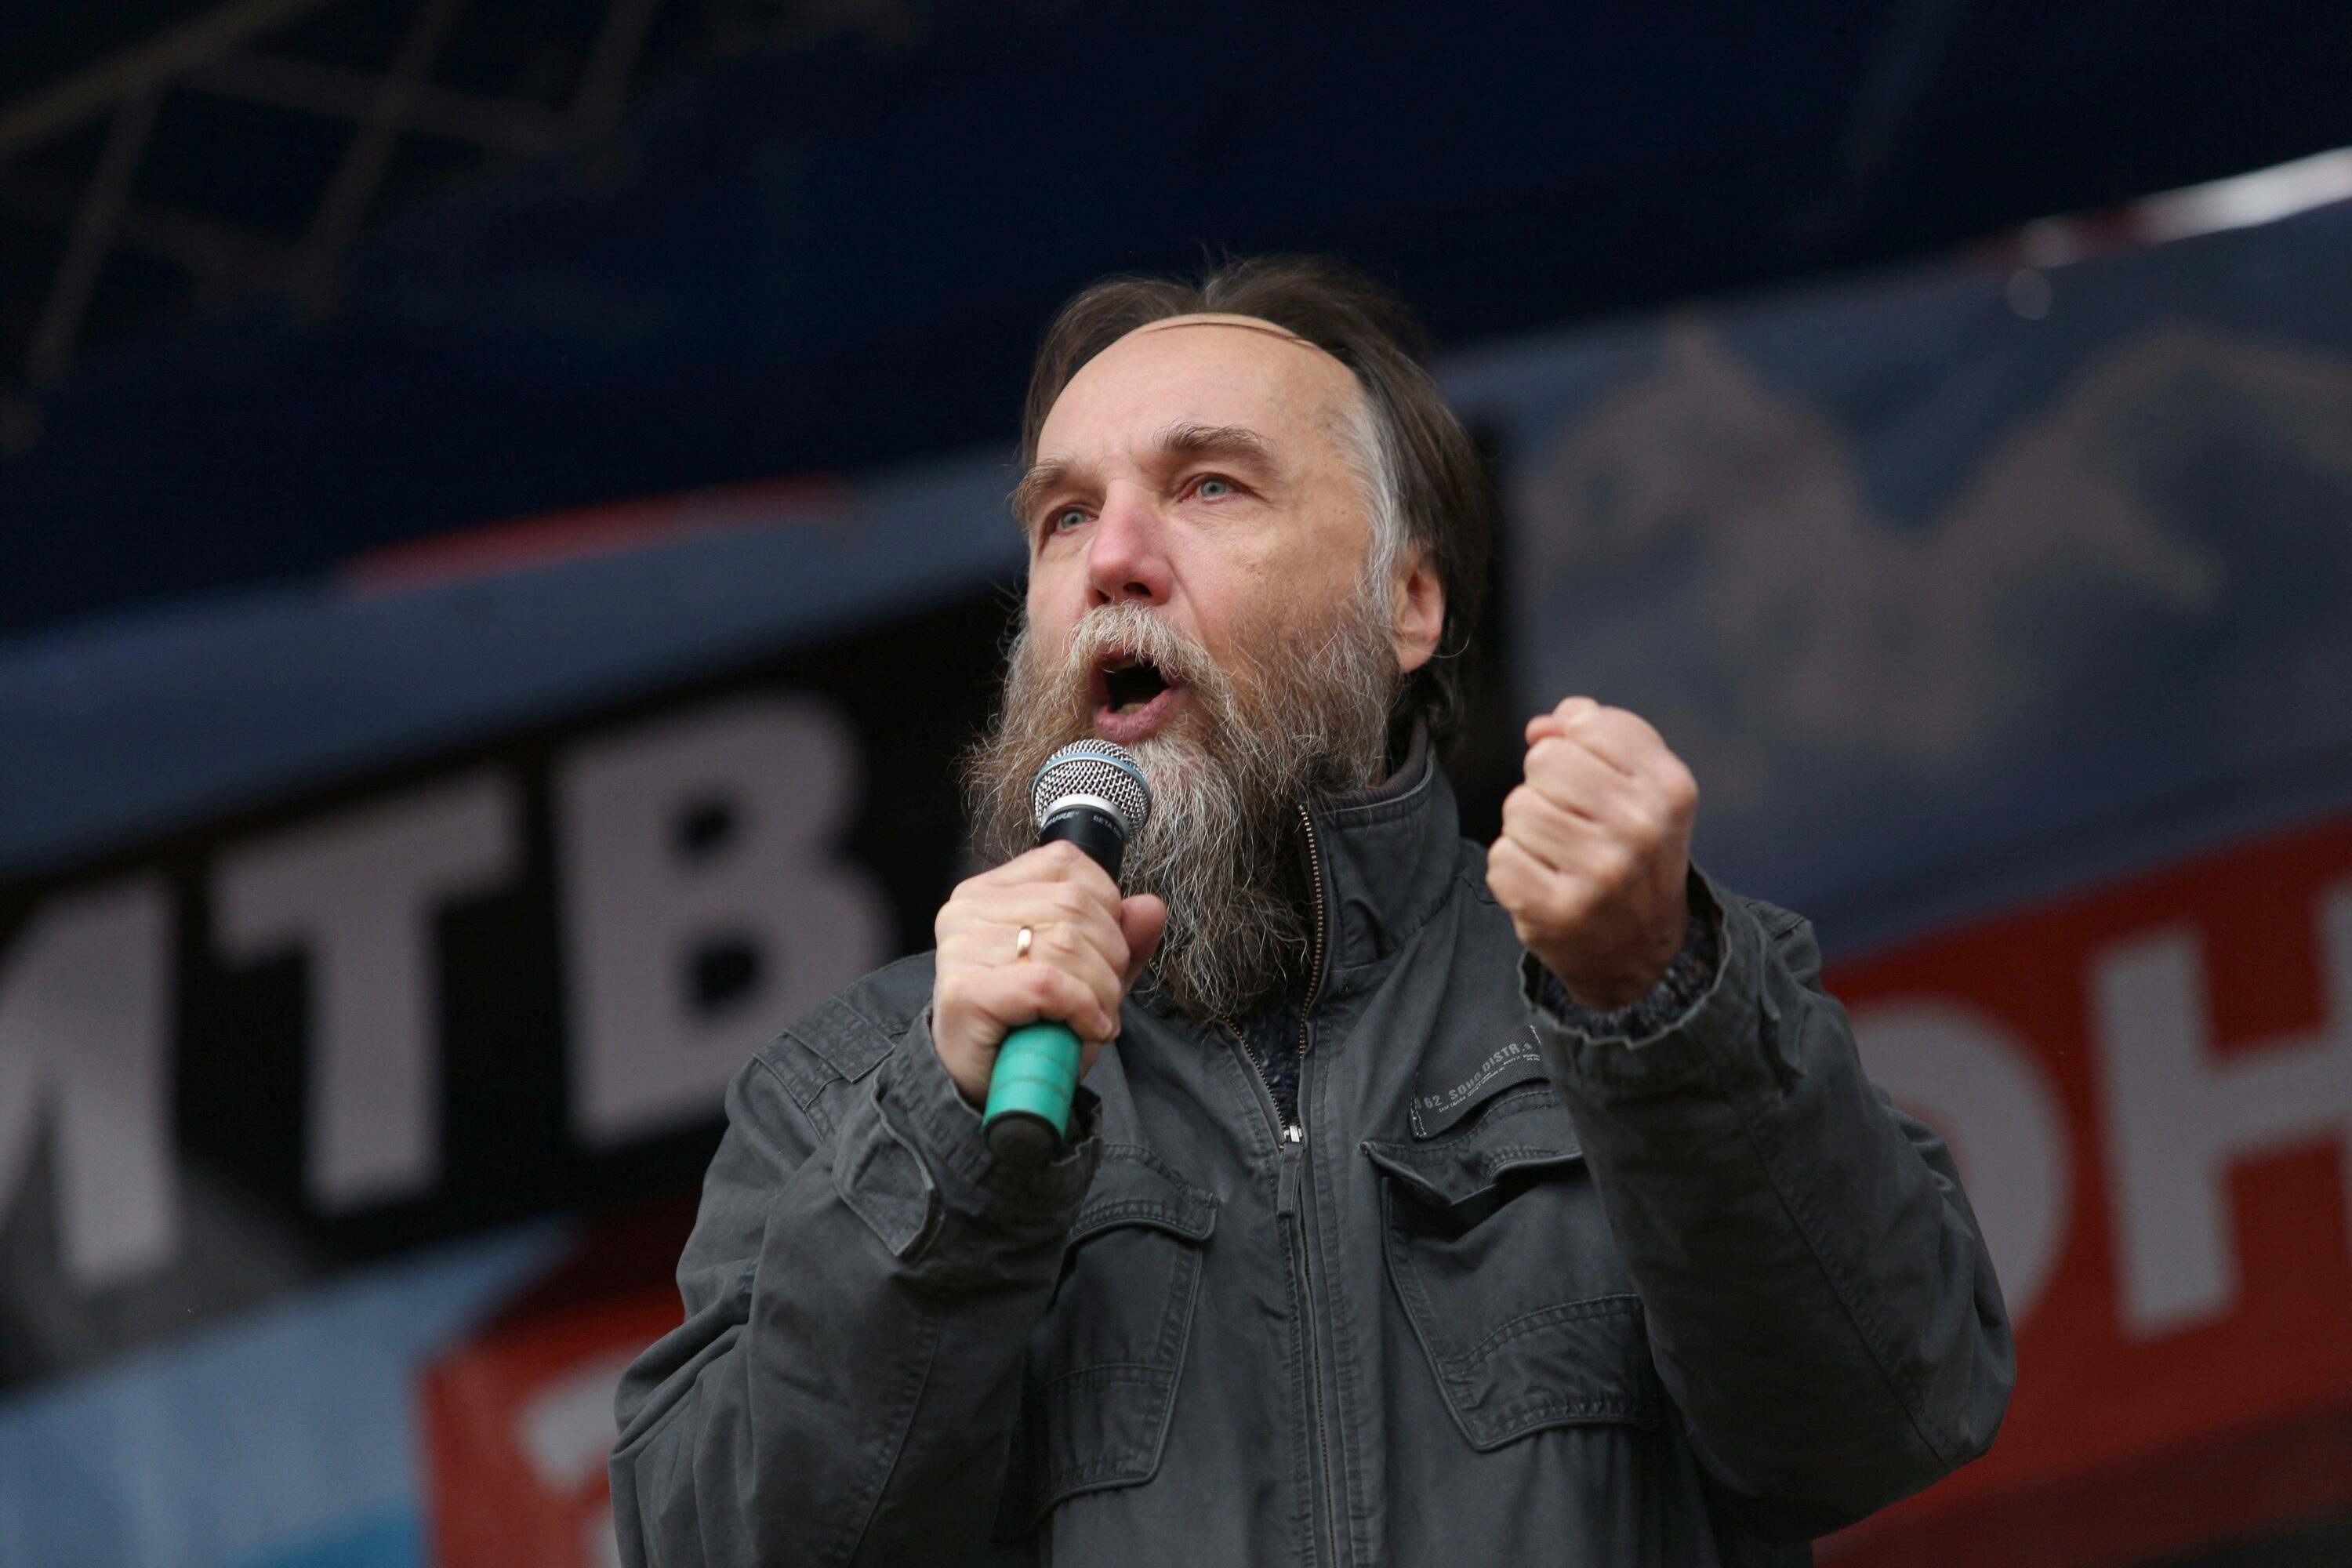 Russian politologist Alexander Dugin addresses a rally in Moscow